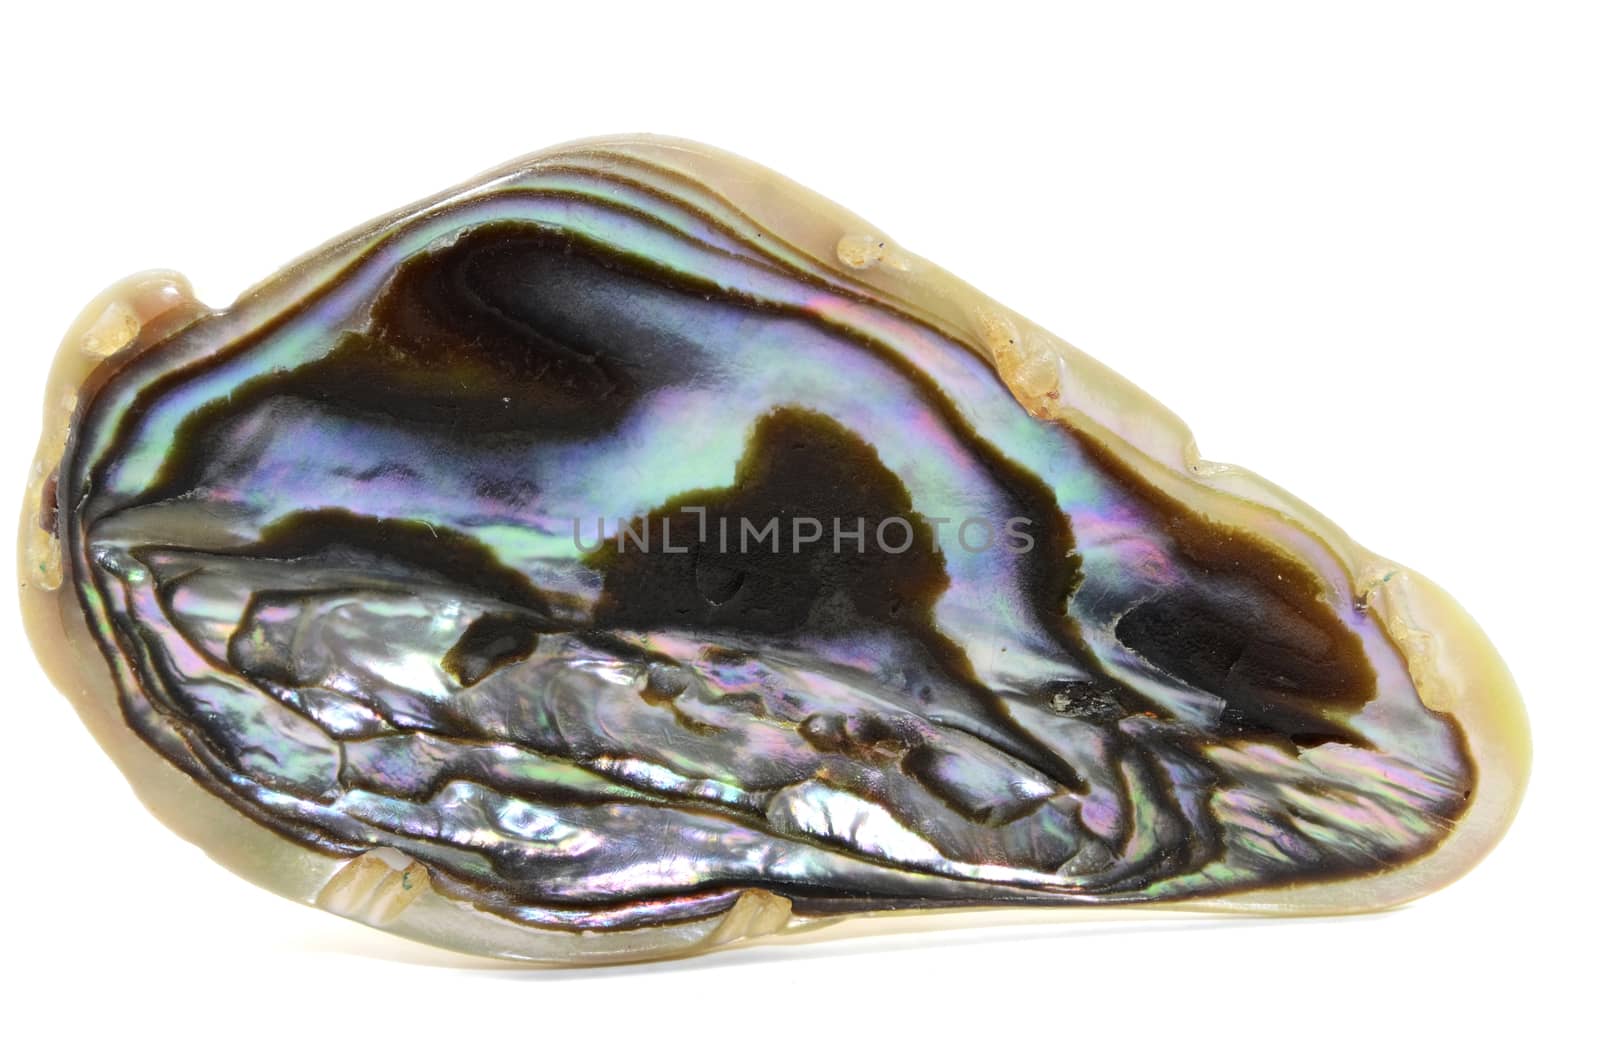 Sample of a beautiful Abalone Shell specimen isolated on white background